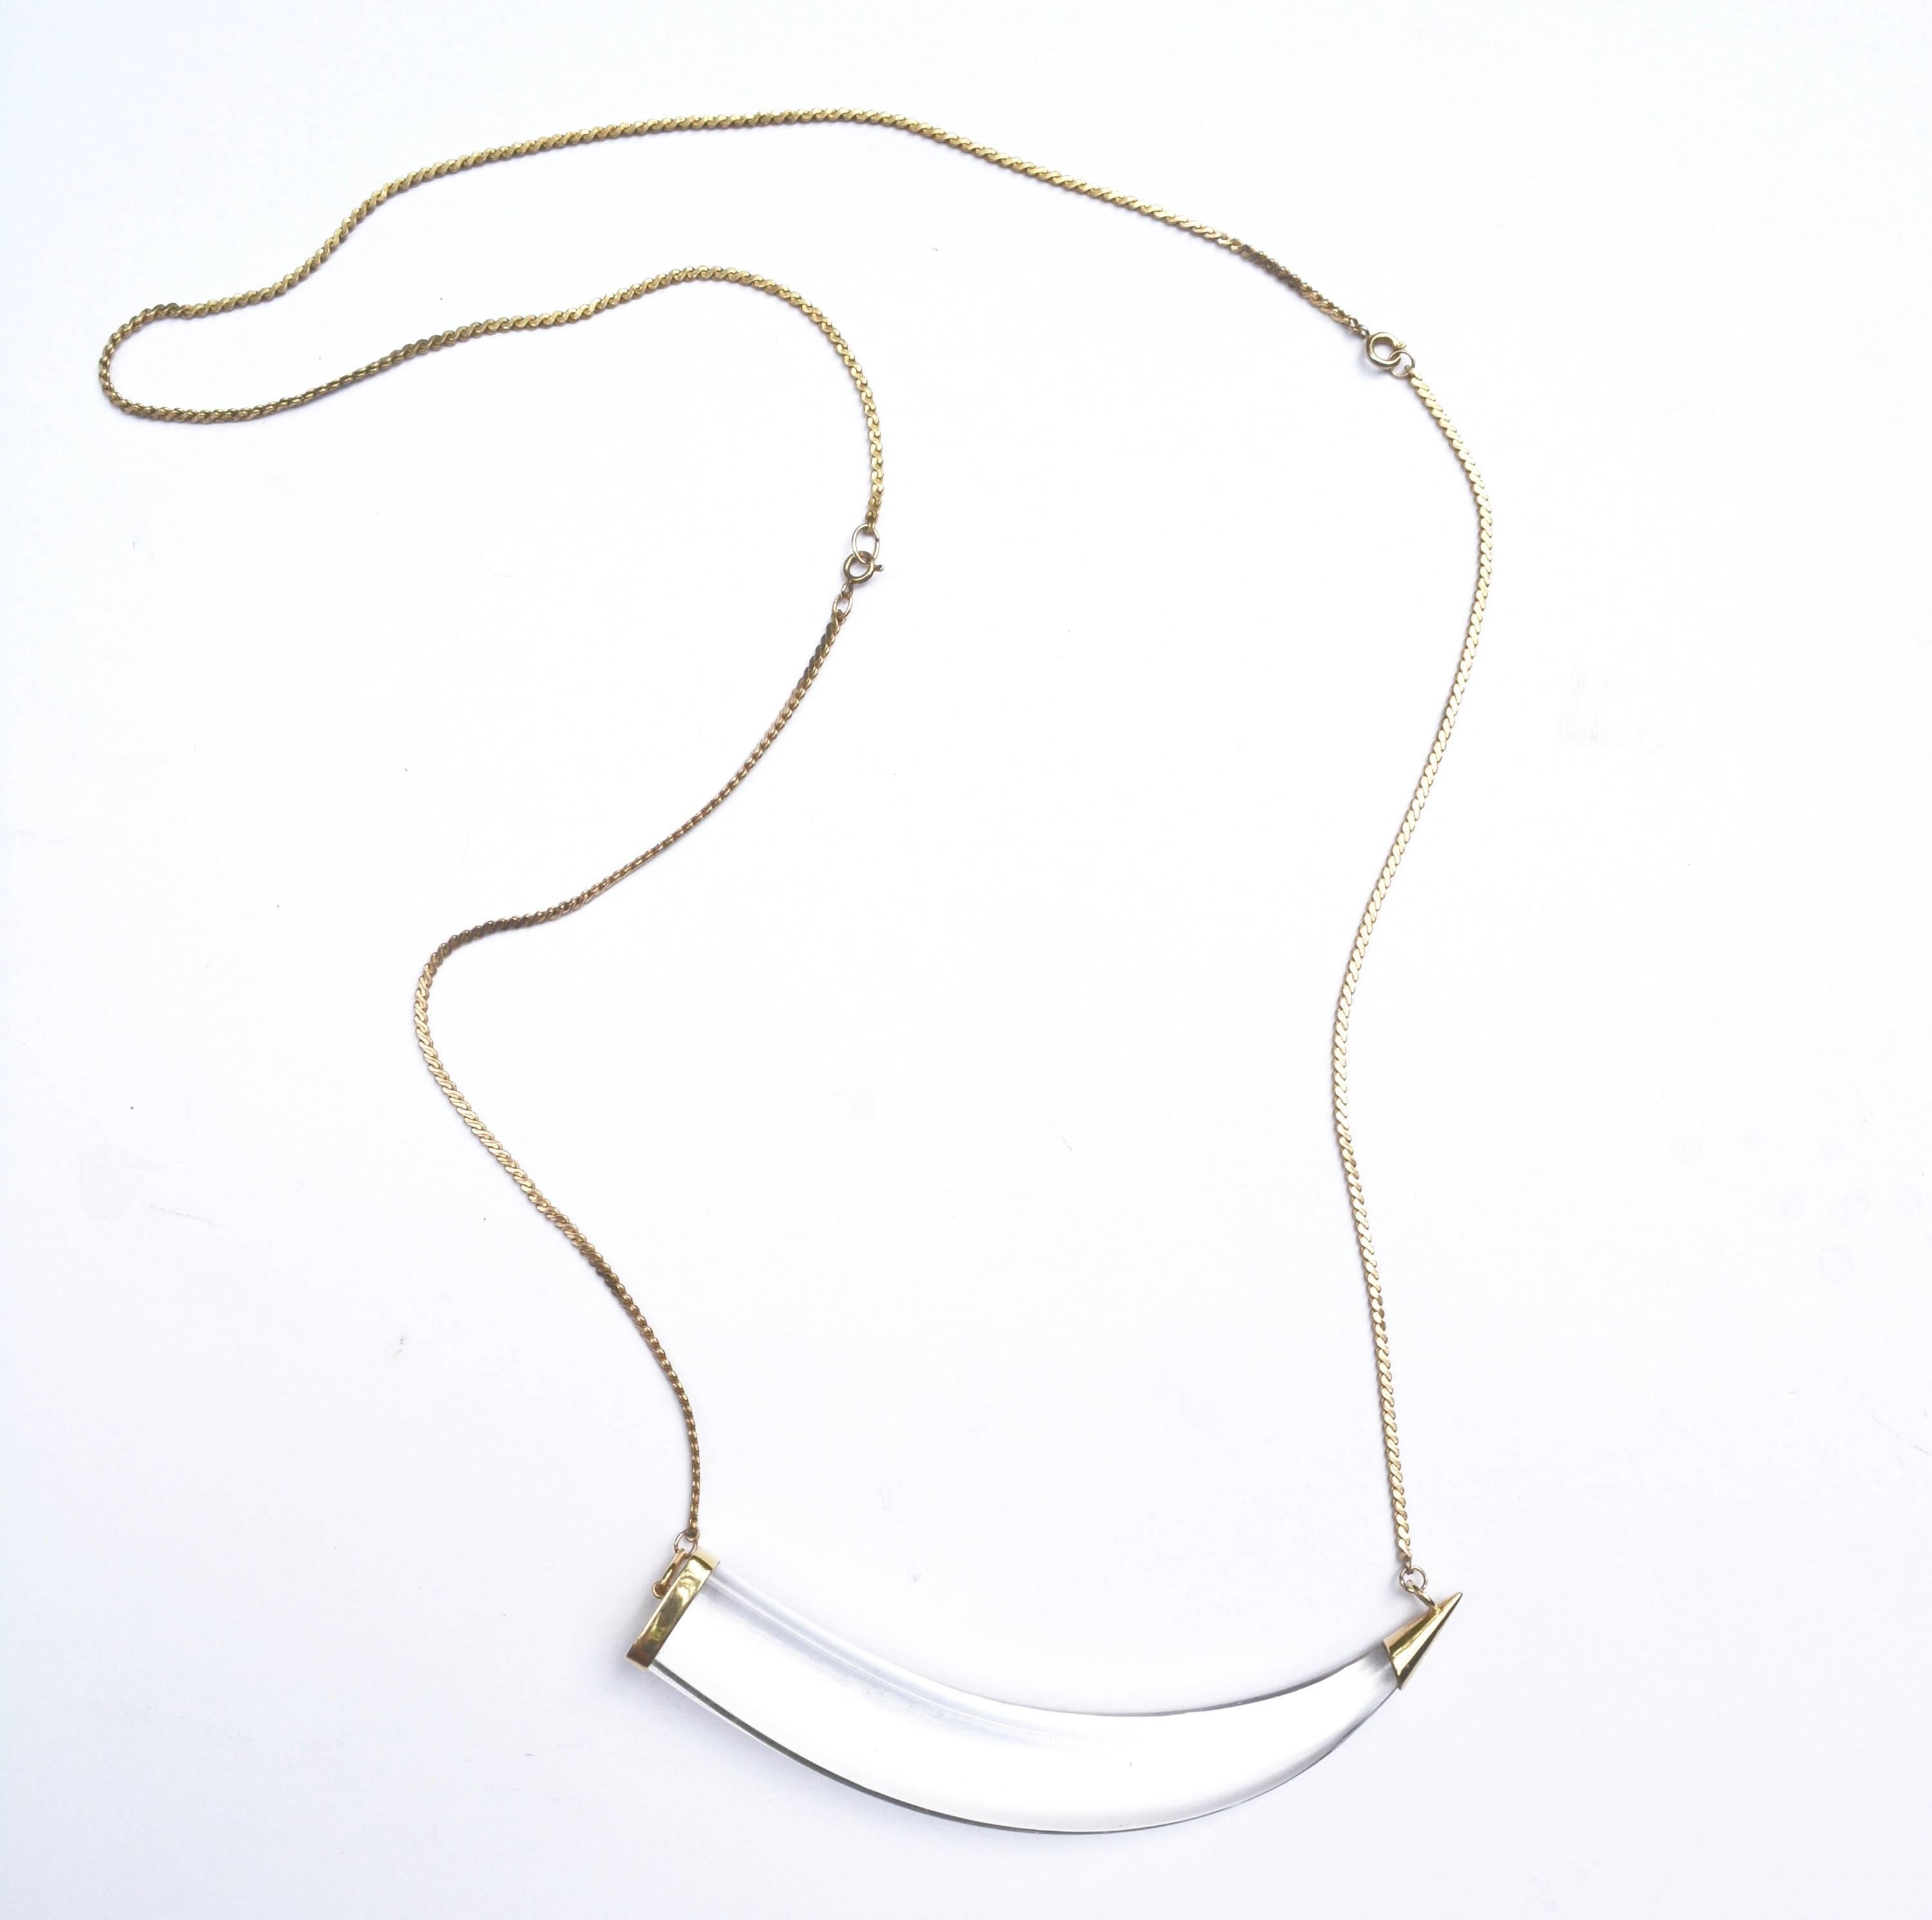 Marked 750 Pierez or P Ierez 18K gold crystal pendant on a gold filled chain which has been double and can be detached for a smaller length. Circa 1970s.  Can be worn at about 18 or 32" long.  Charm is about 1" wide at the widest, width